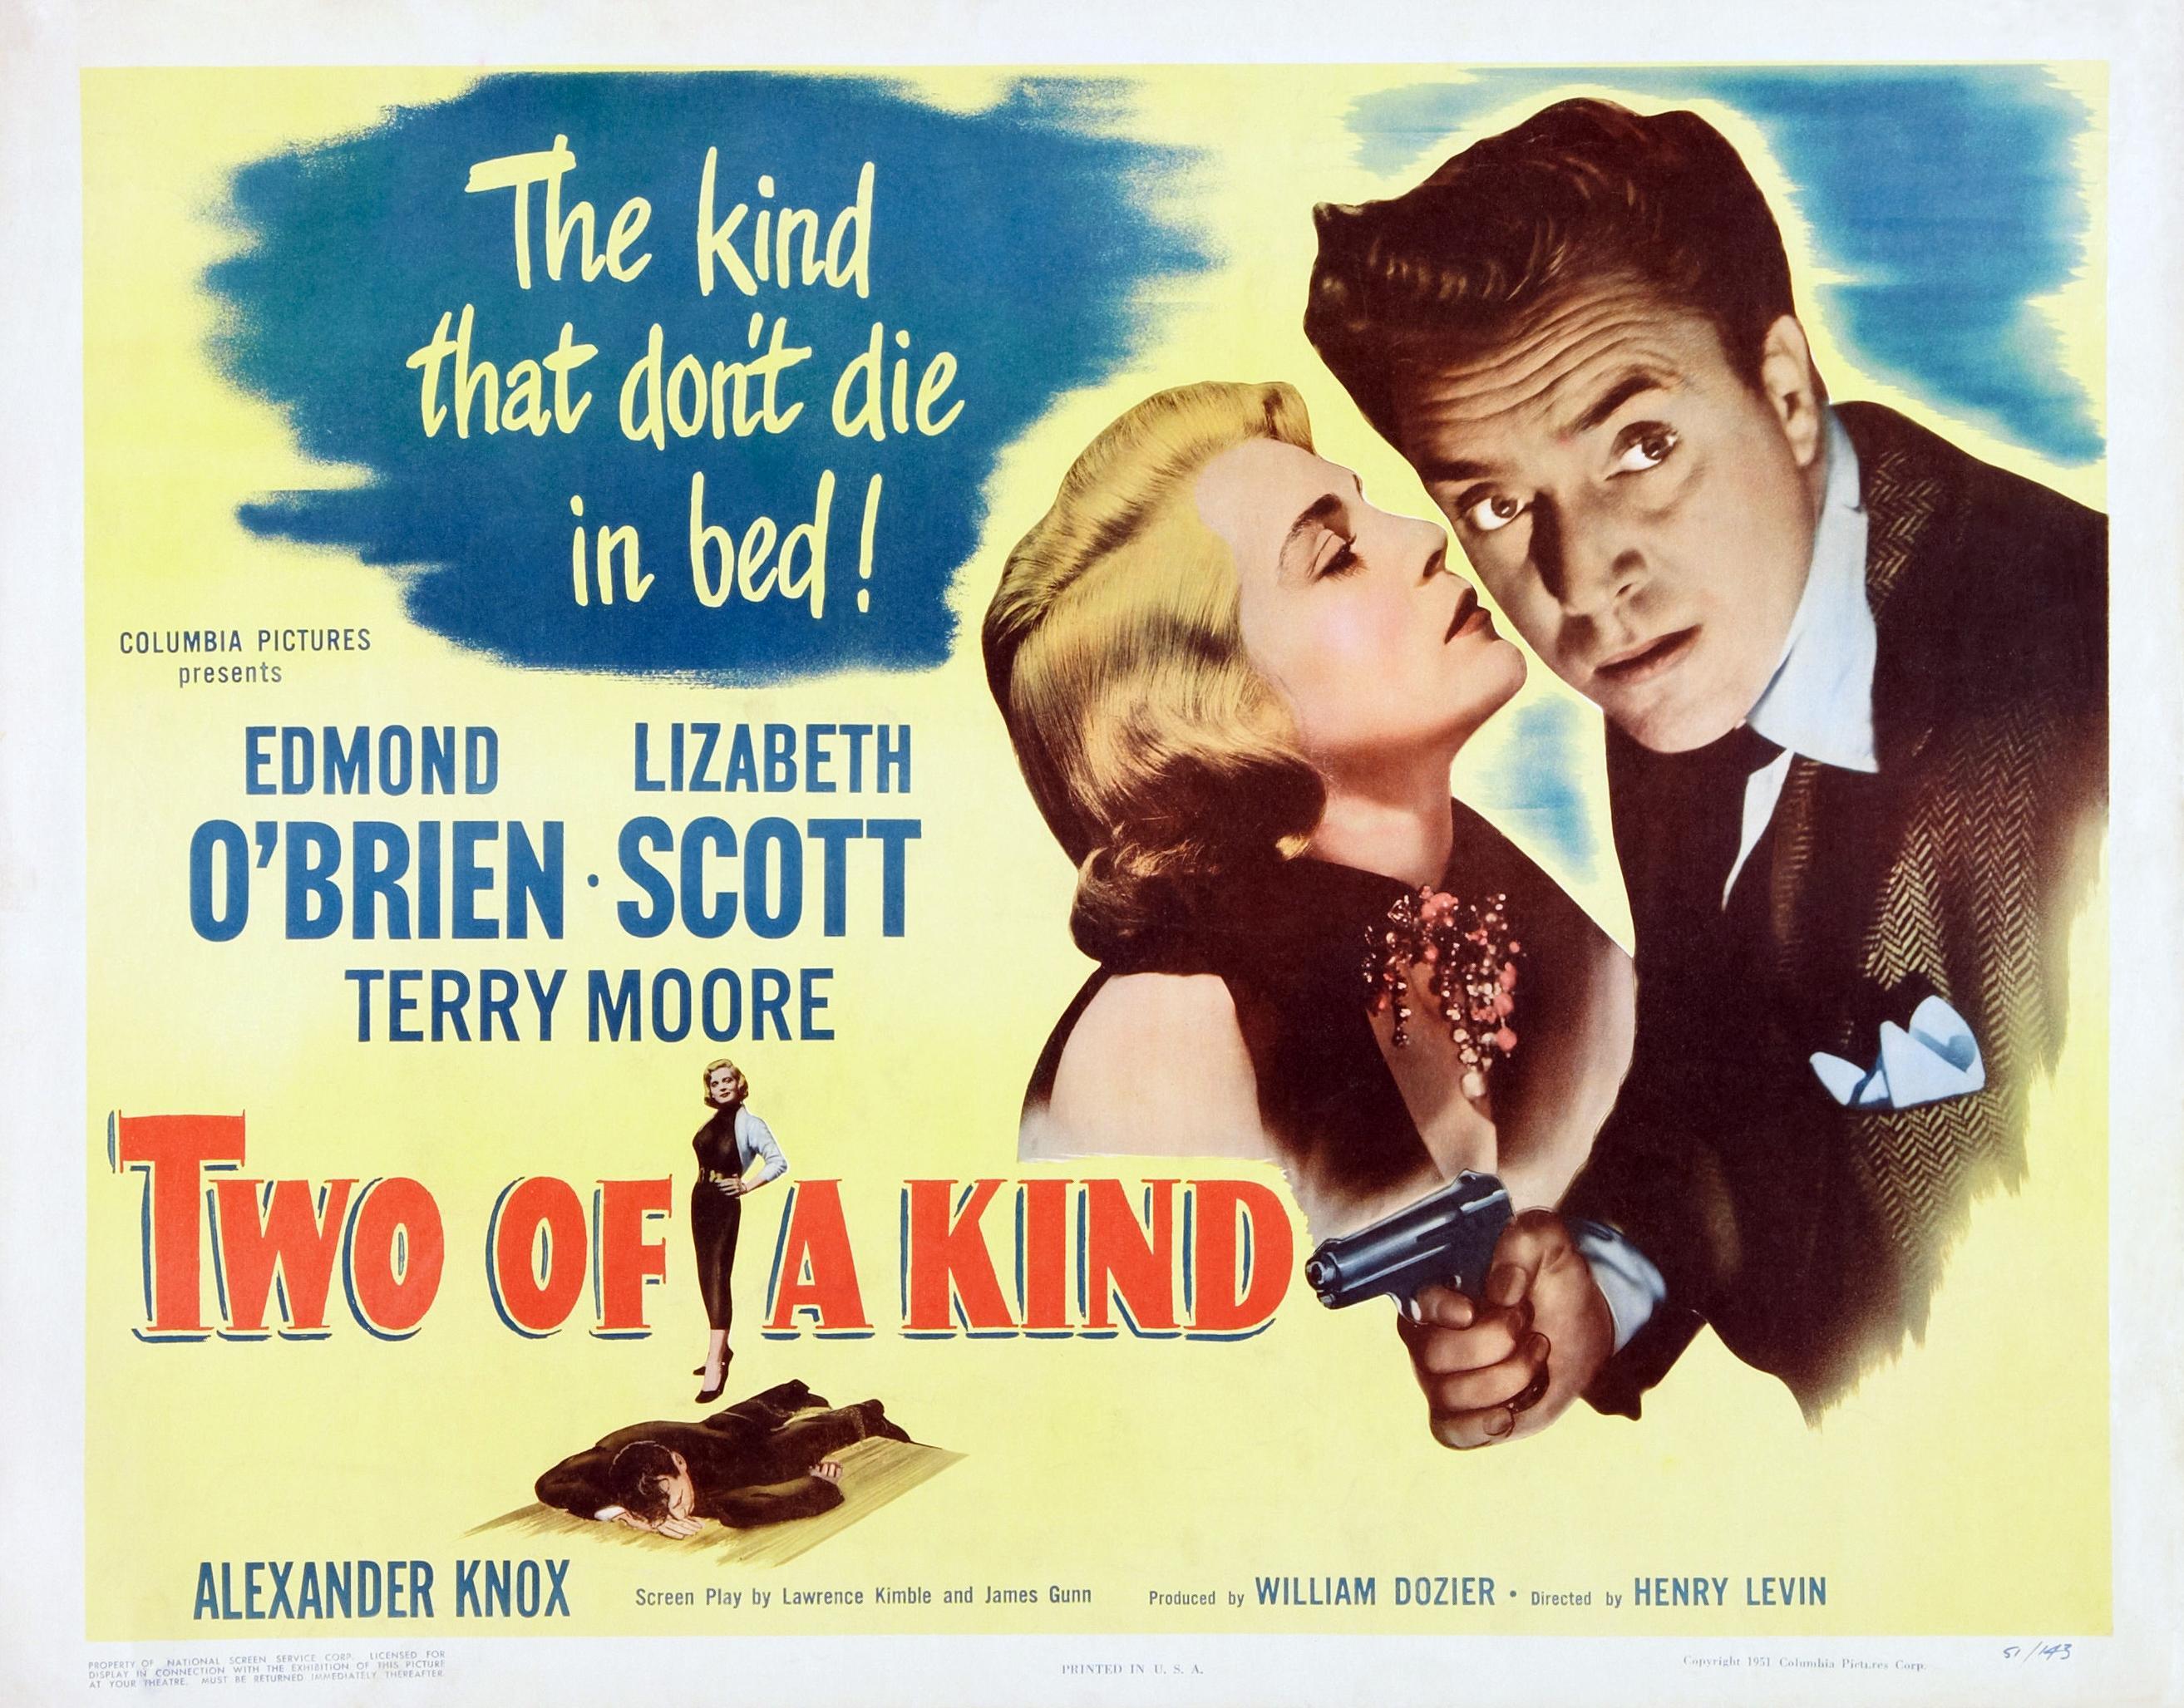 Two of a kind - two of a kind. Счастливчик Эдмонд Постер. What kind of films you prefer